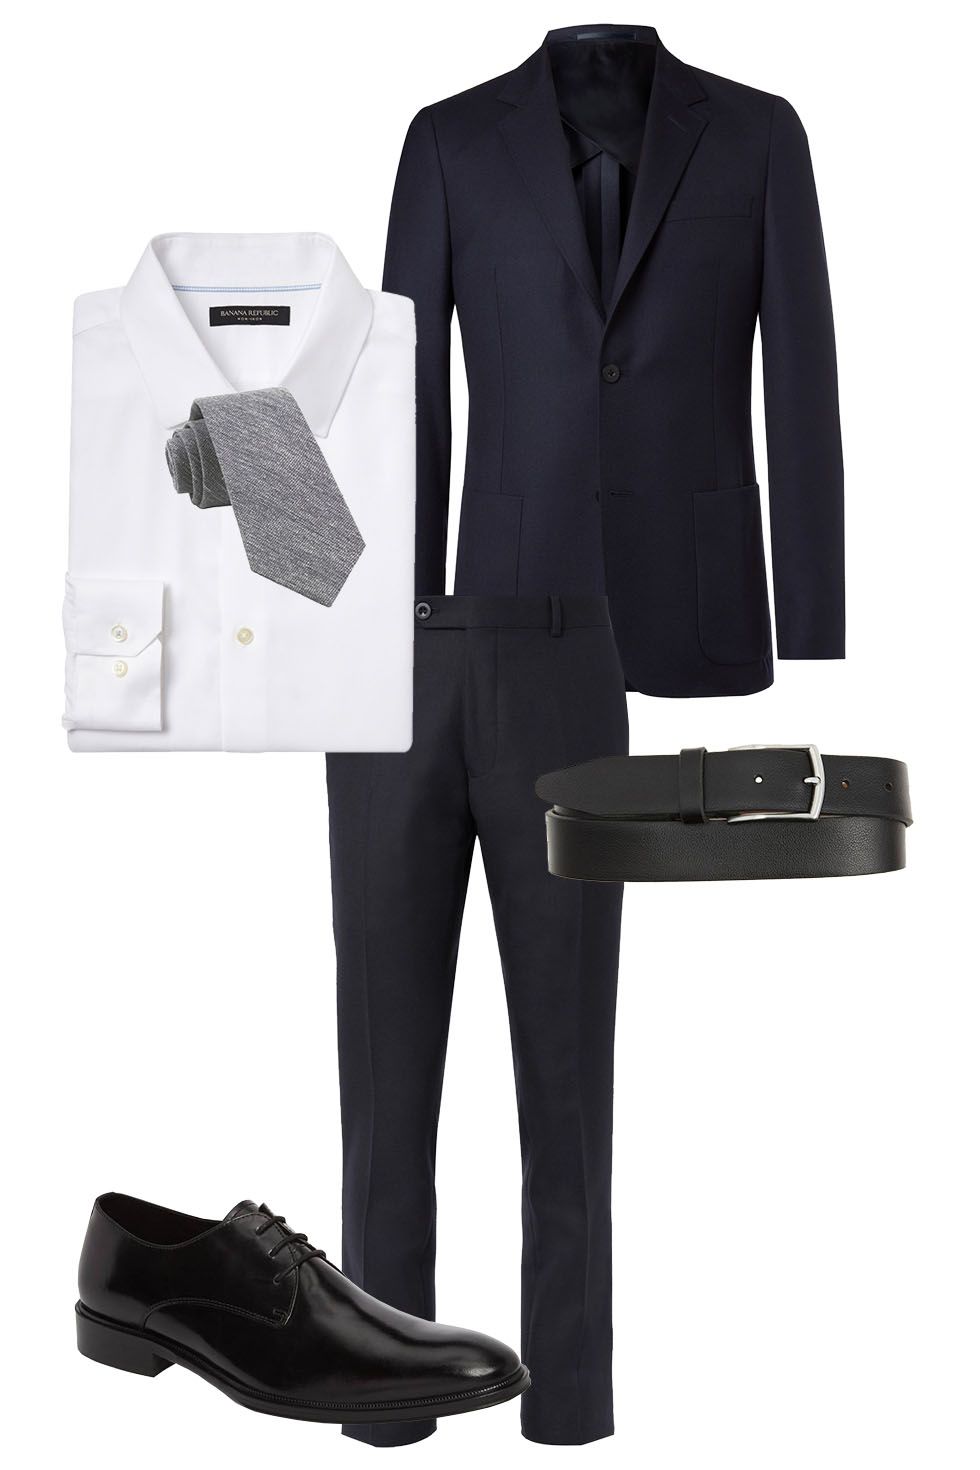 11 perfect outfits for your summer job interview (that won't break the  bank!)